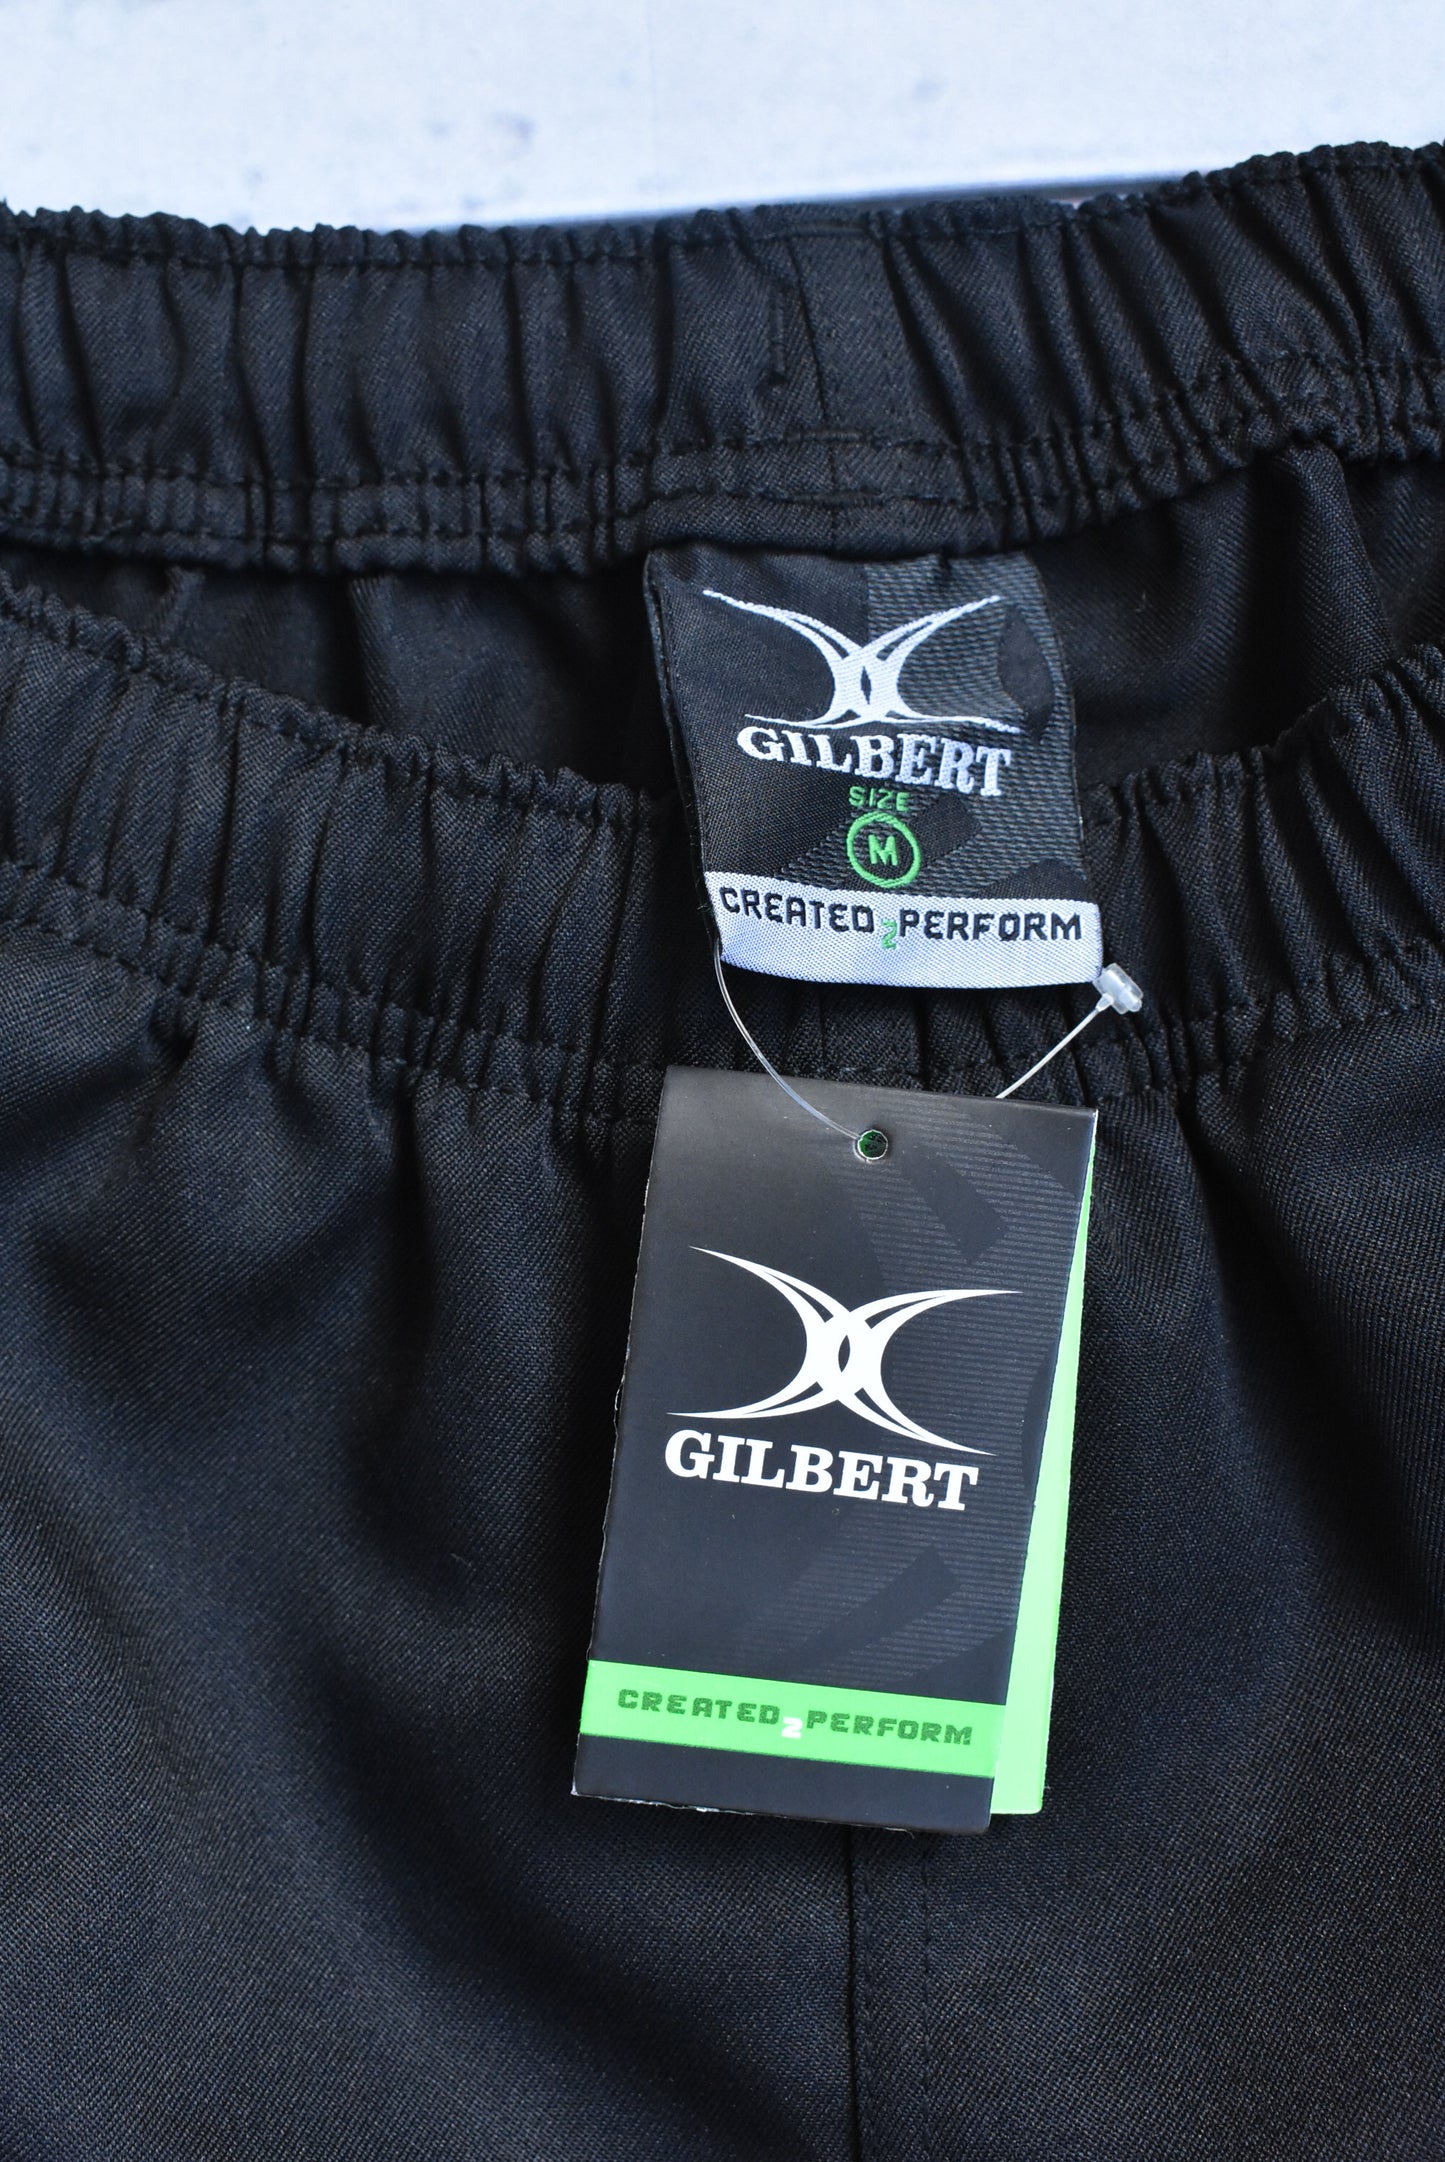 NEW Gilbert men's rugby shorts, size M